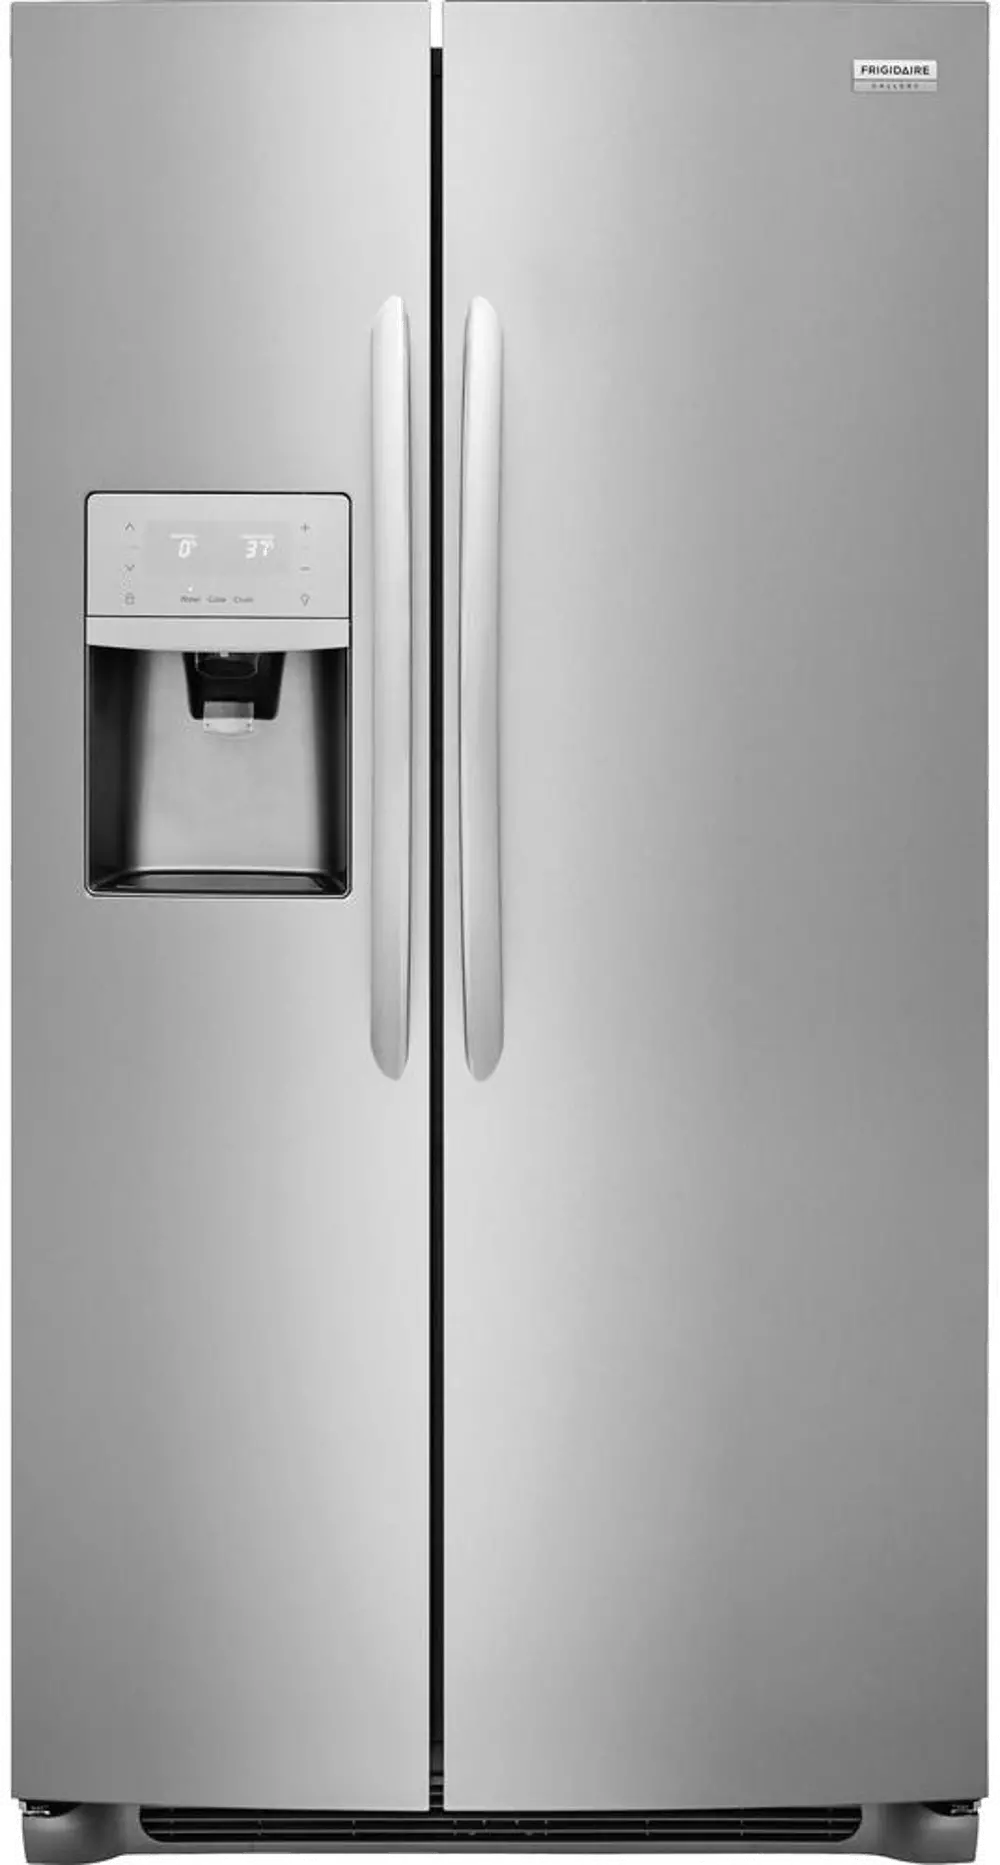 FGSS2635TF Frigidaire Gallery 25.5 cu. ft. Side by Side Refrigerator - 36 Inch Stainless Steel-1